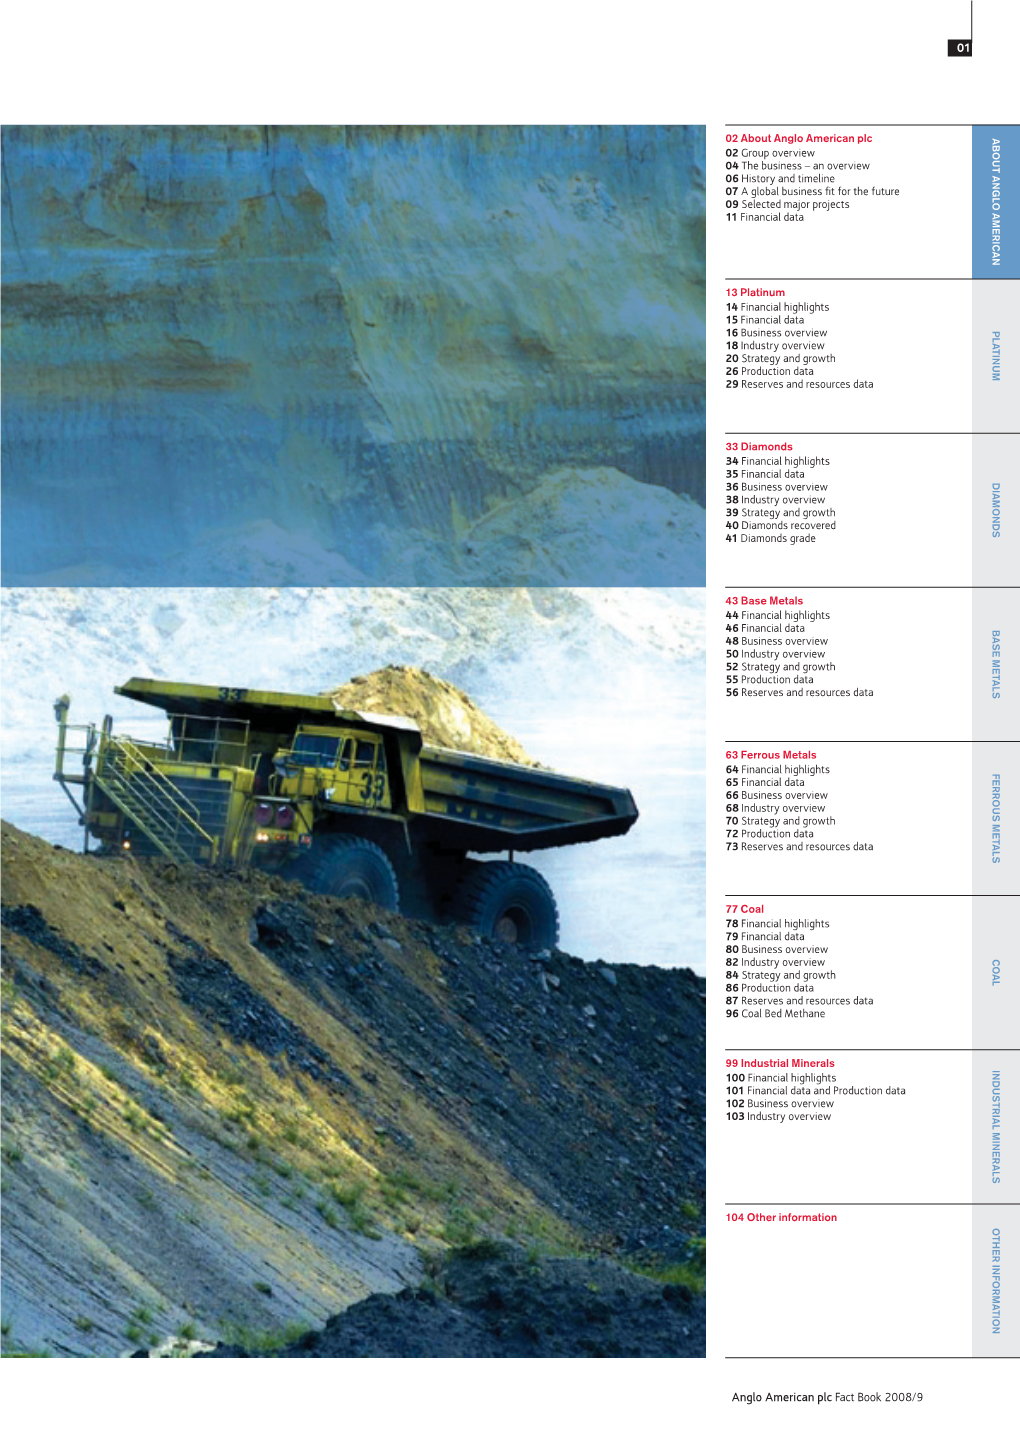 Anglo American Plc Fact Book 2008/9 01